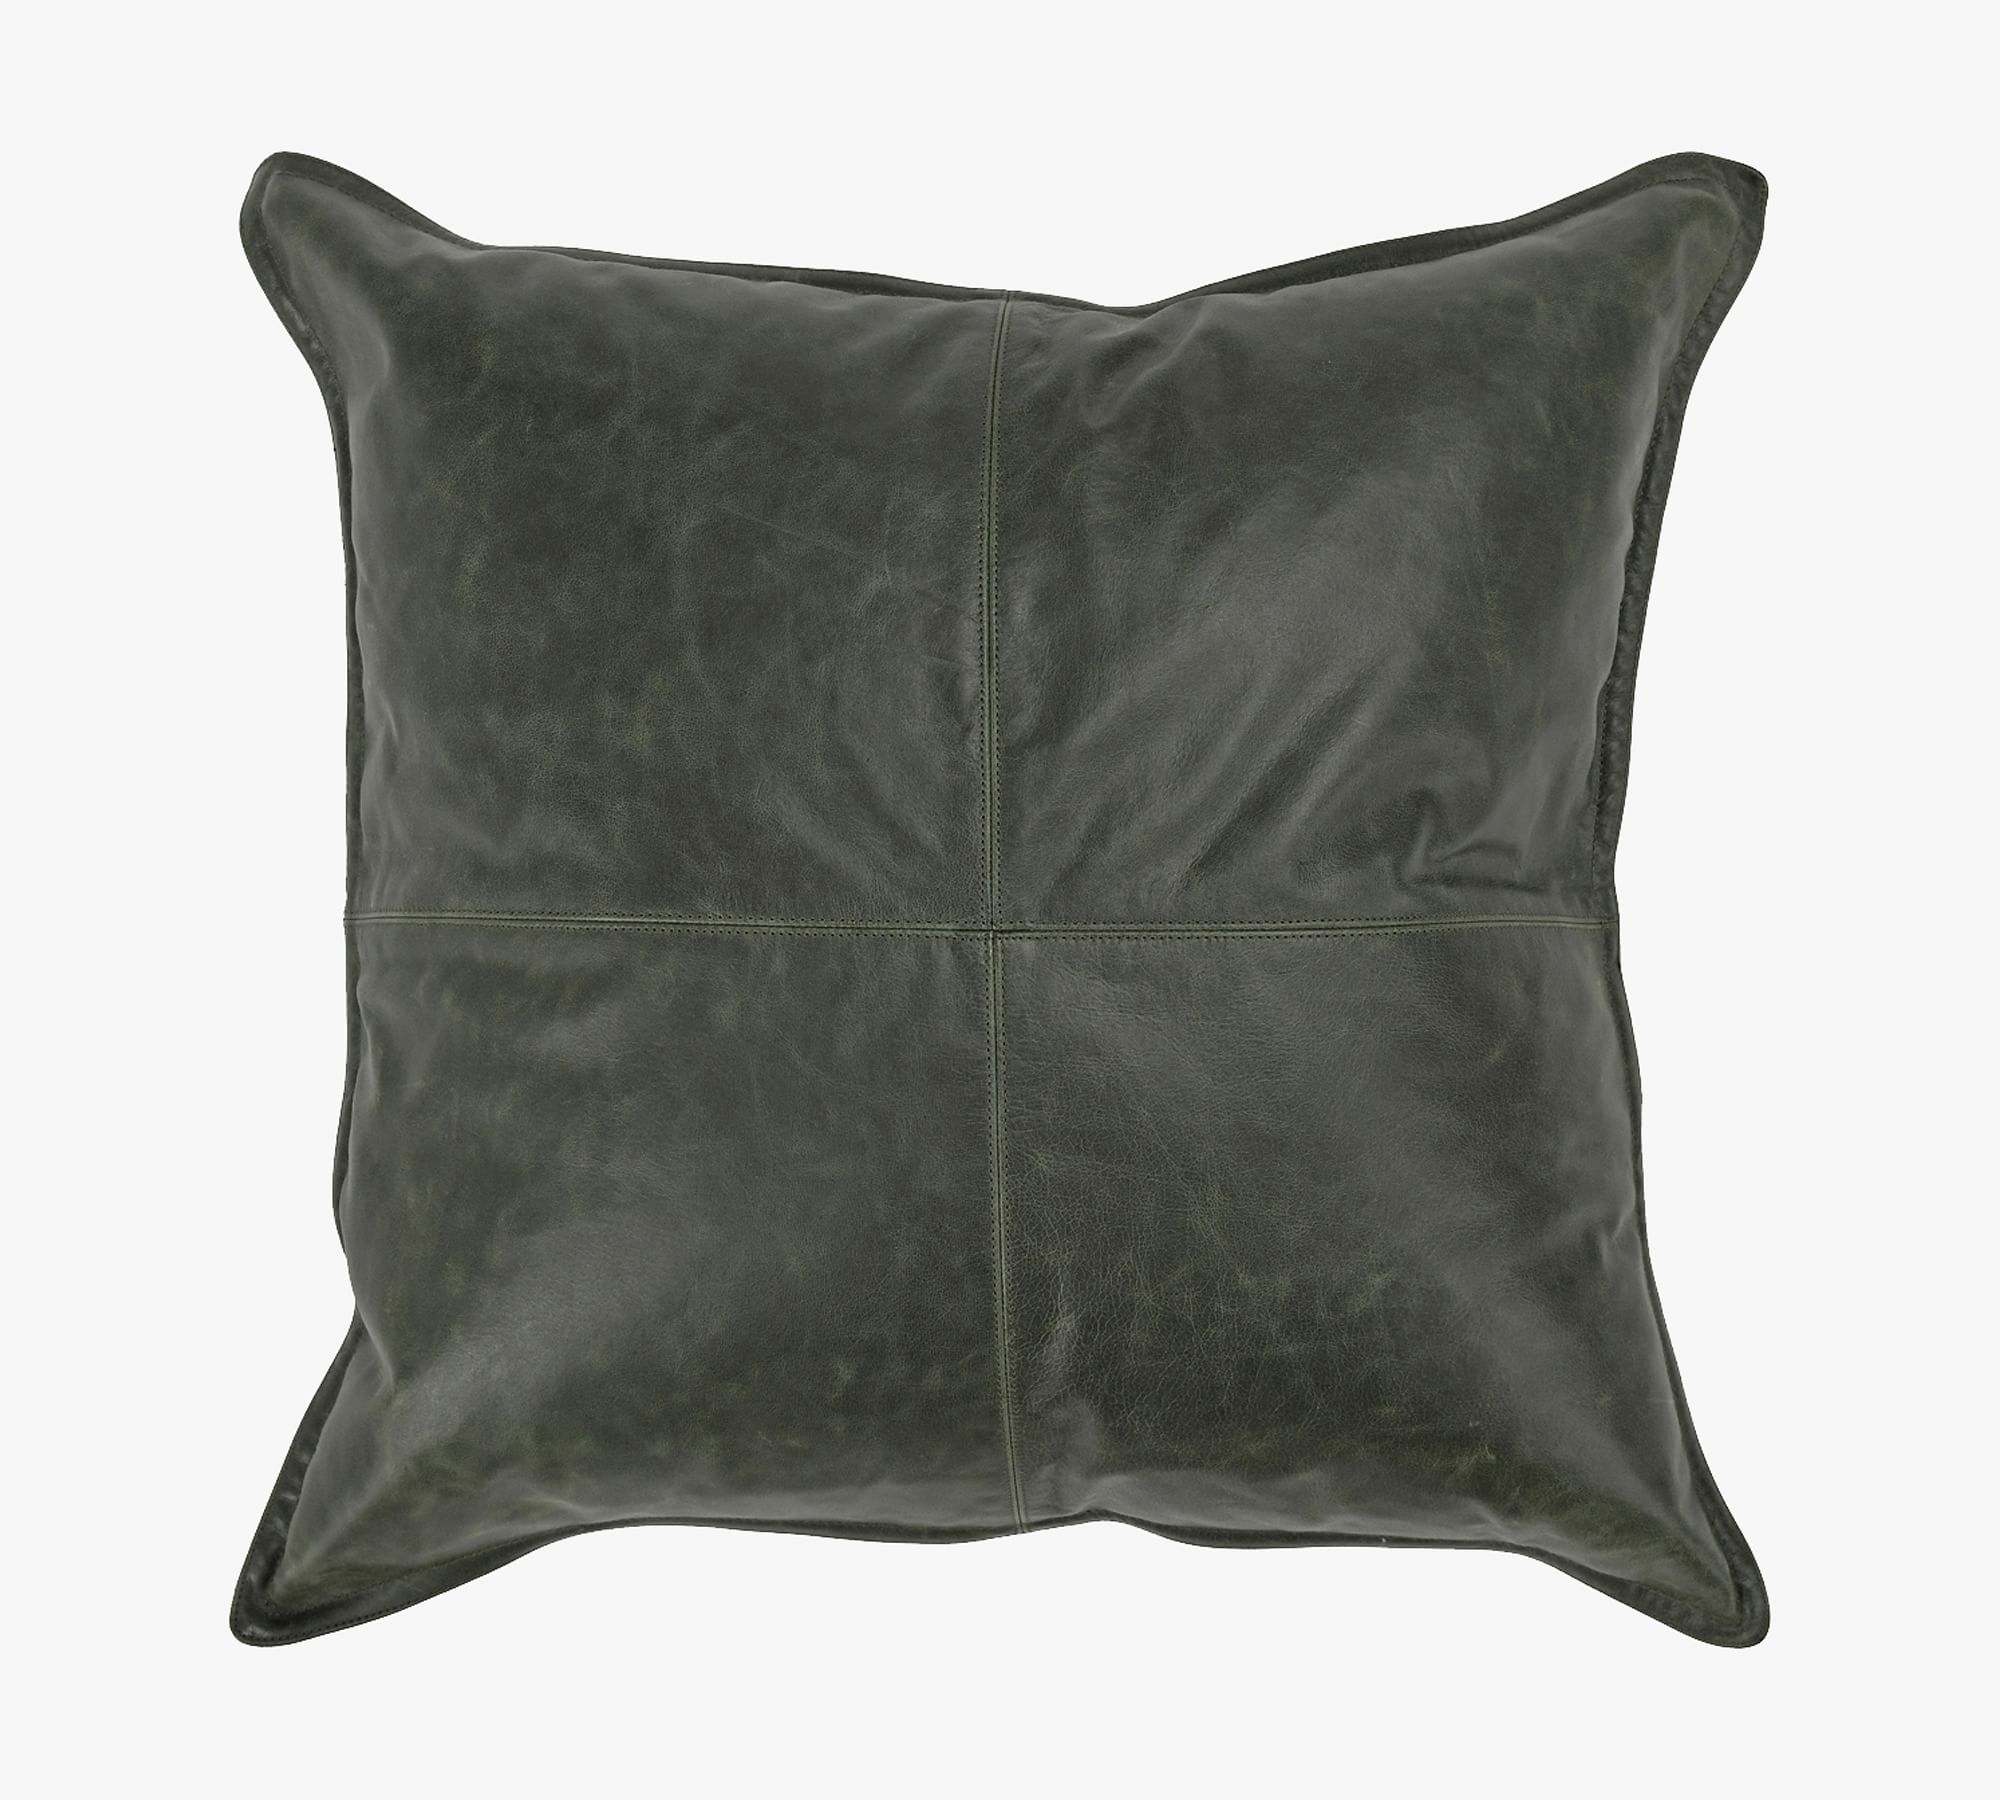 Gaona Leather Pillow Cover